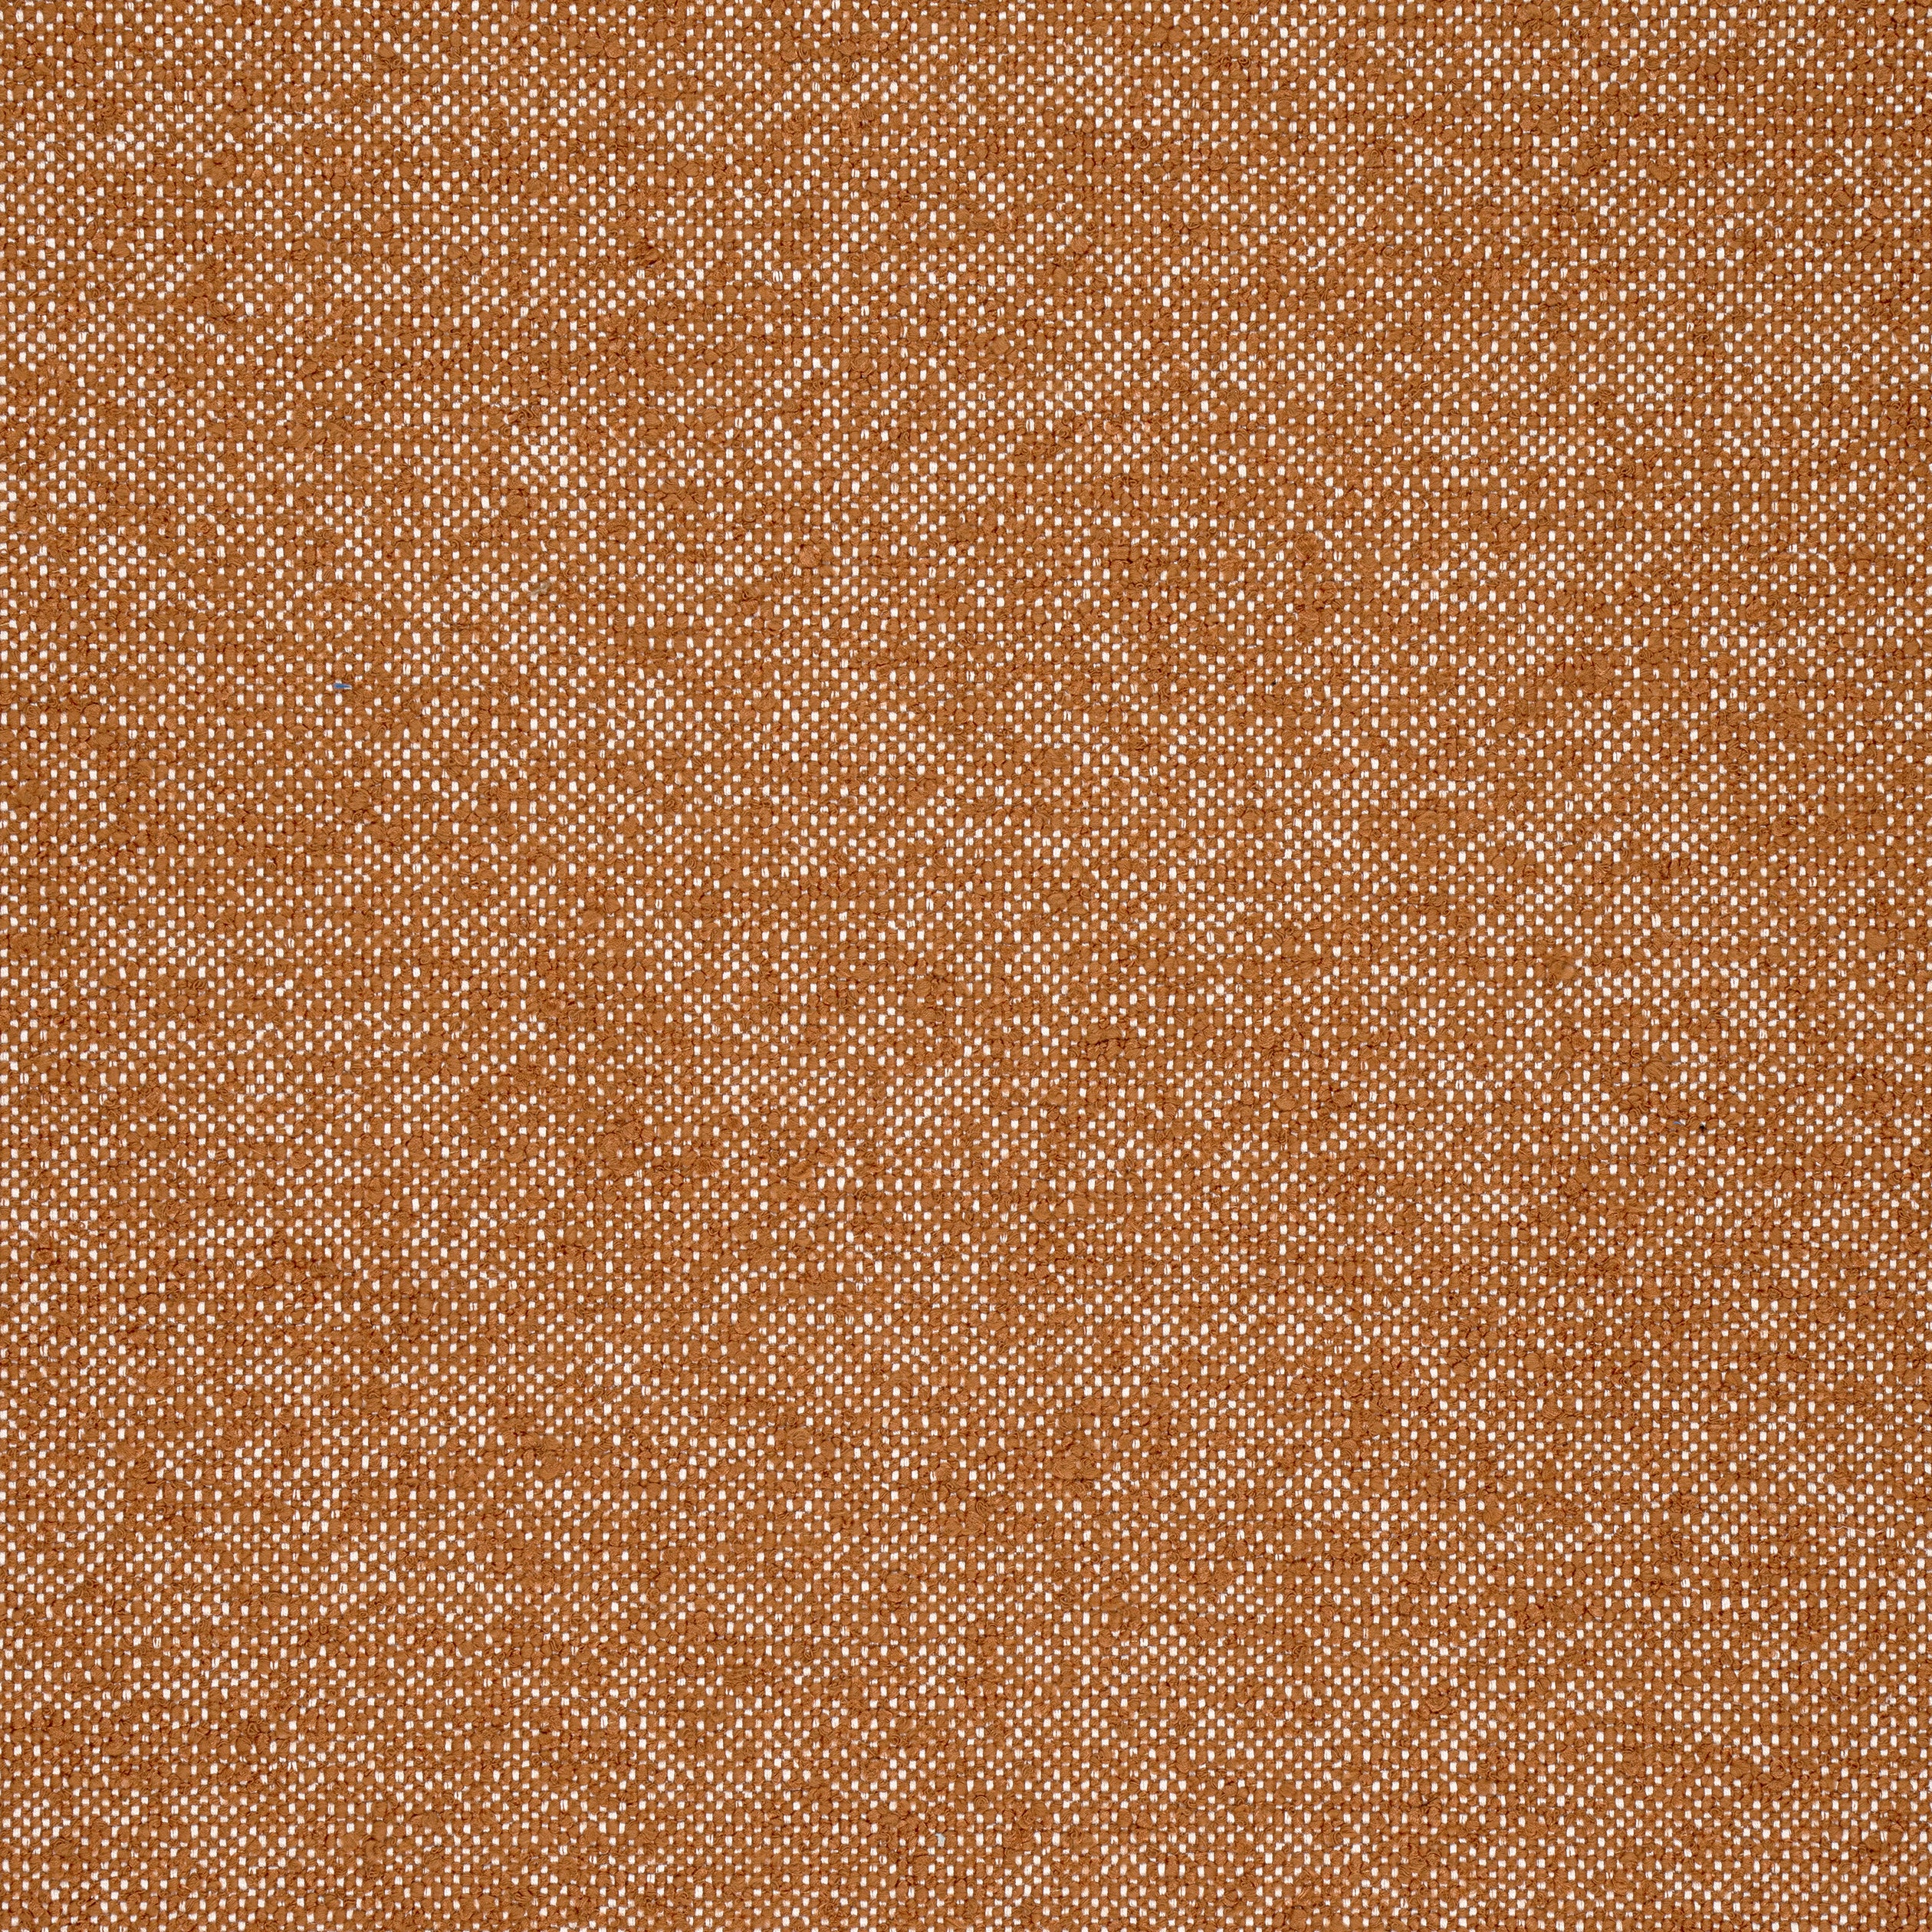 Sasso fabric in copper color - pattern number W77105 - by Thibaut in the Veneto collection